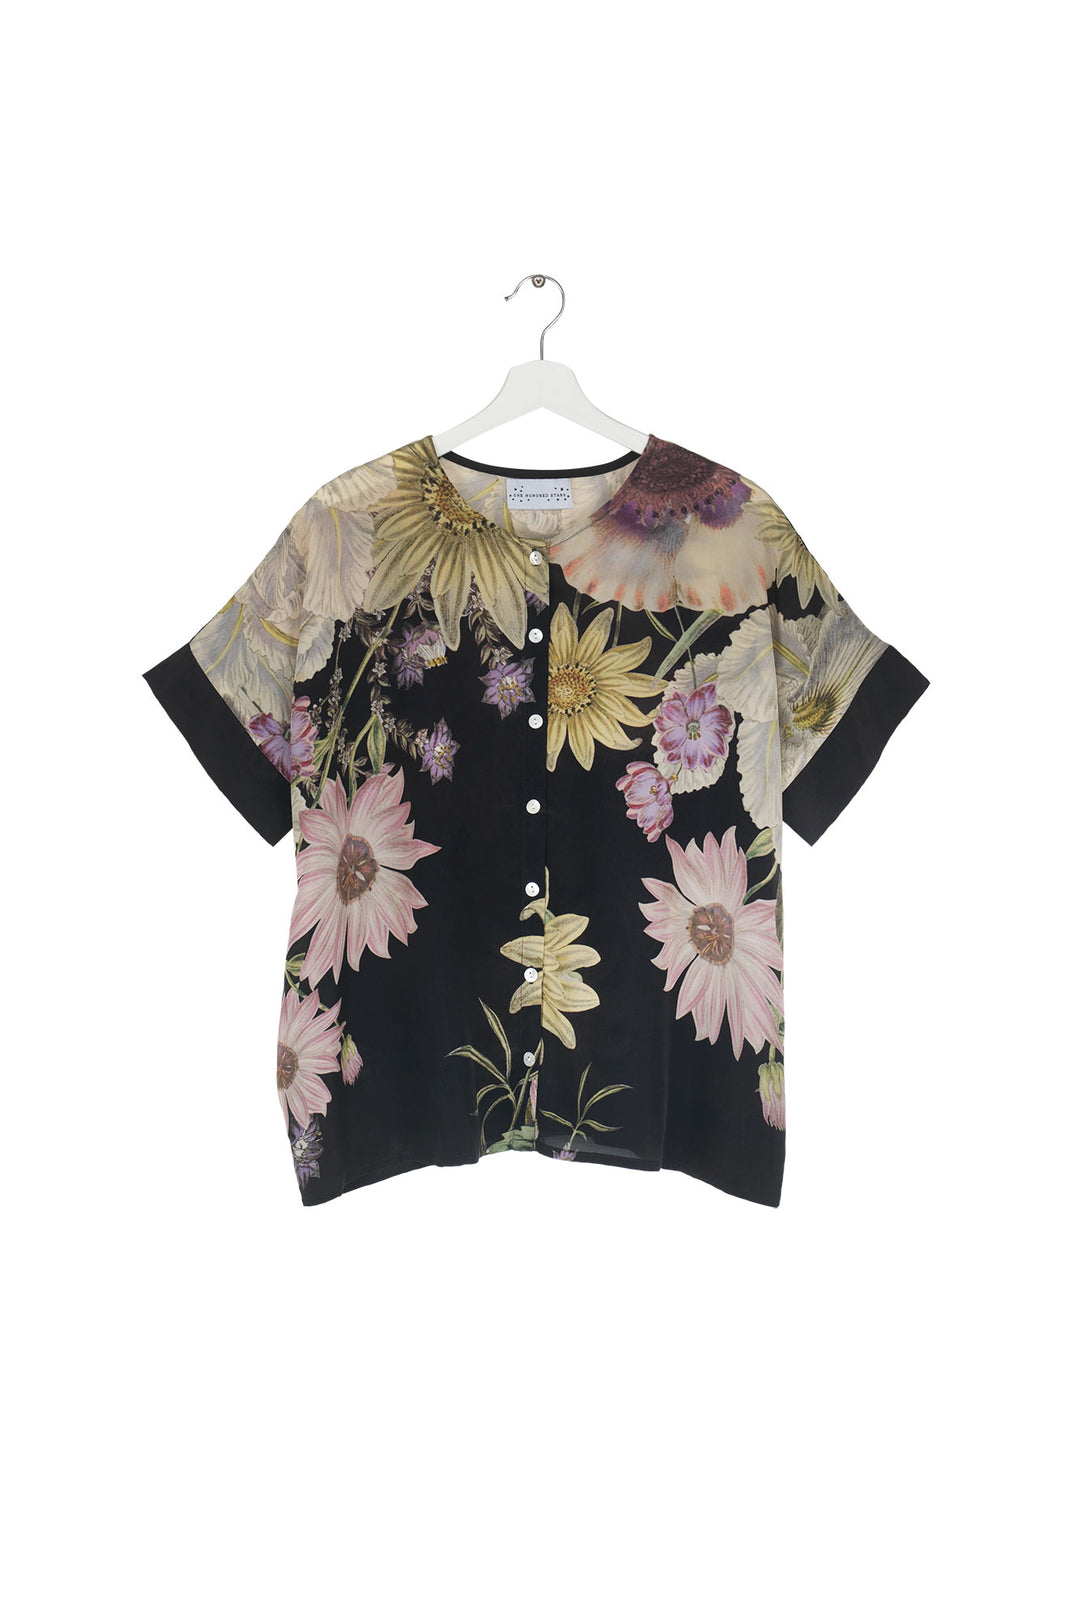 Women's button up short sleeve blouse in black with daisy floral print by One Hundred Stars